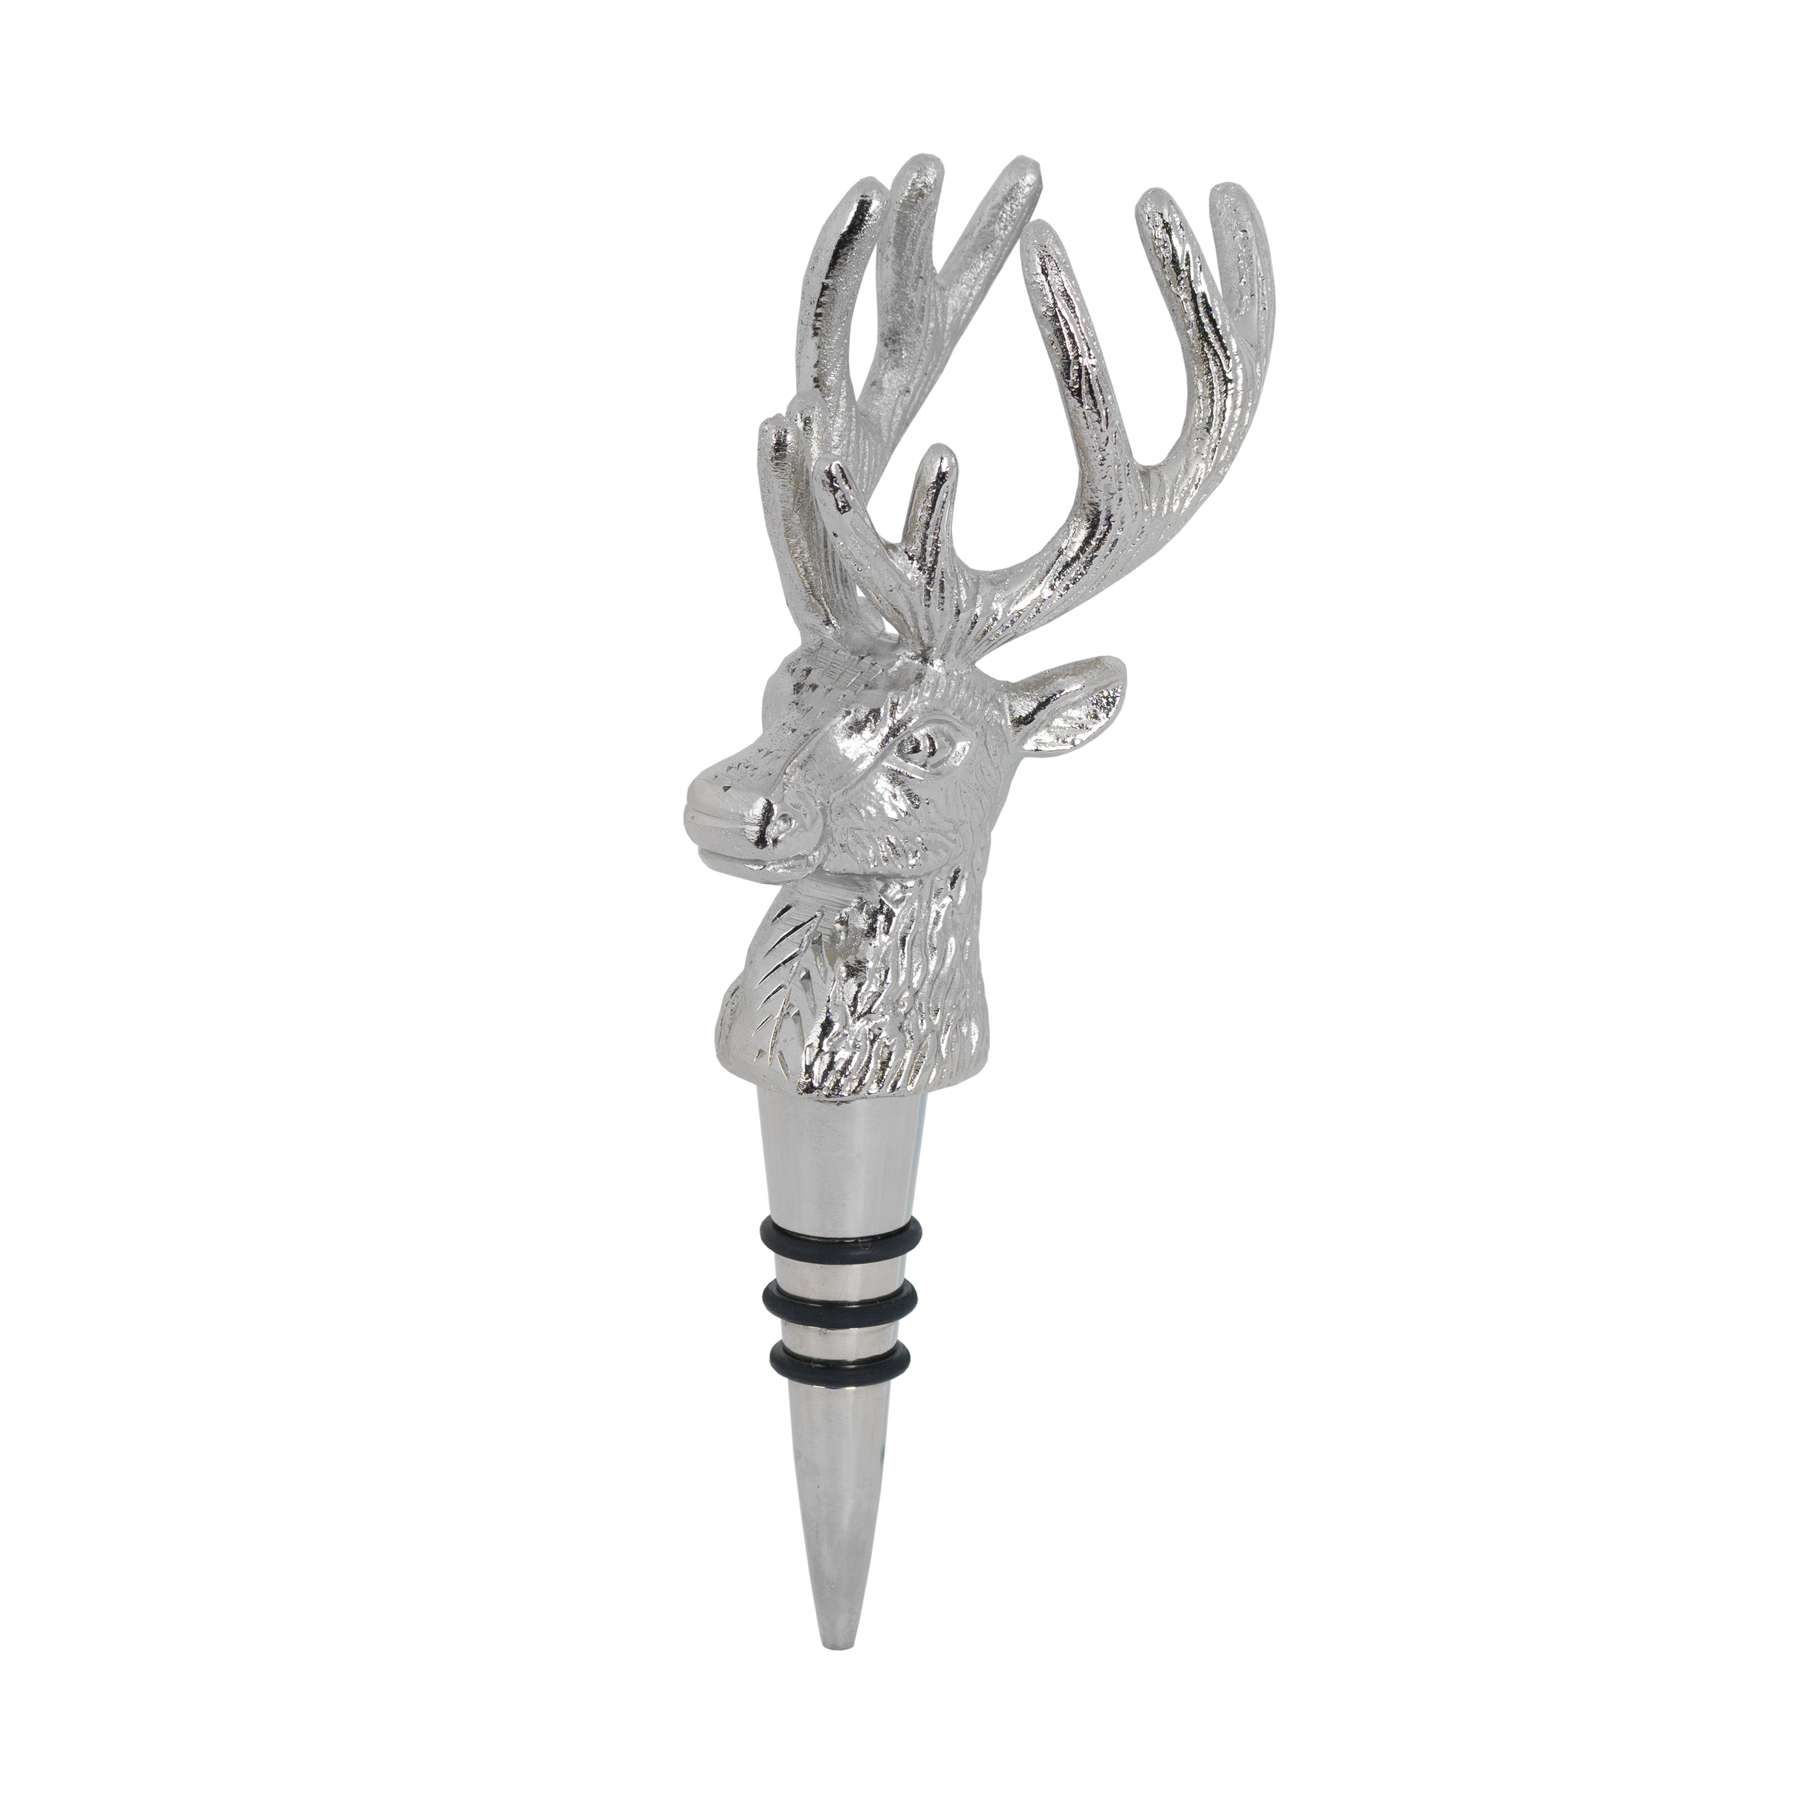 Nickel Stag Head Bottle Stopper - Image 1